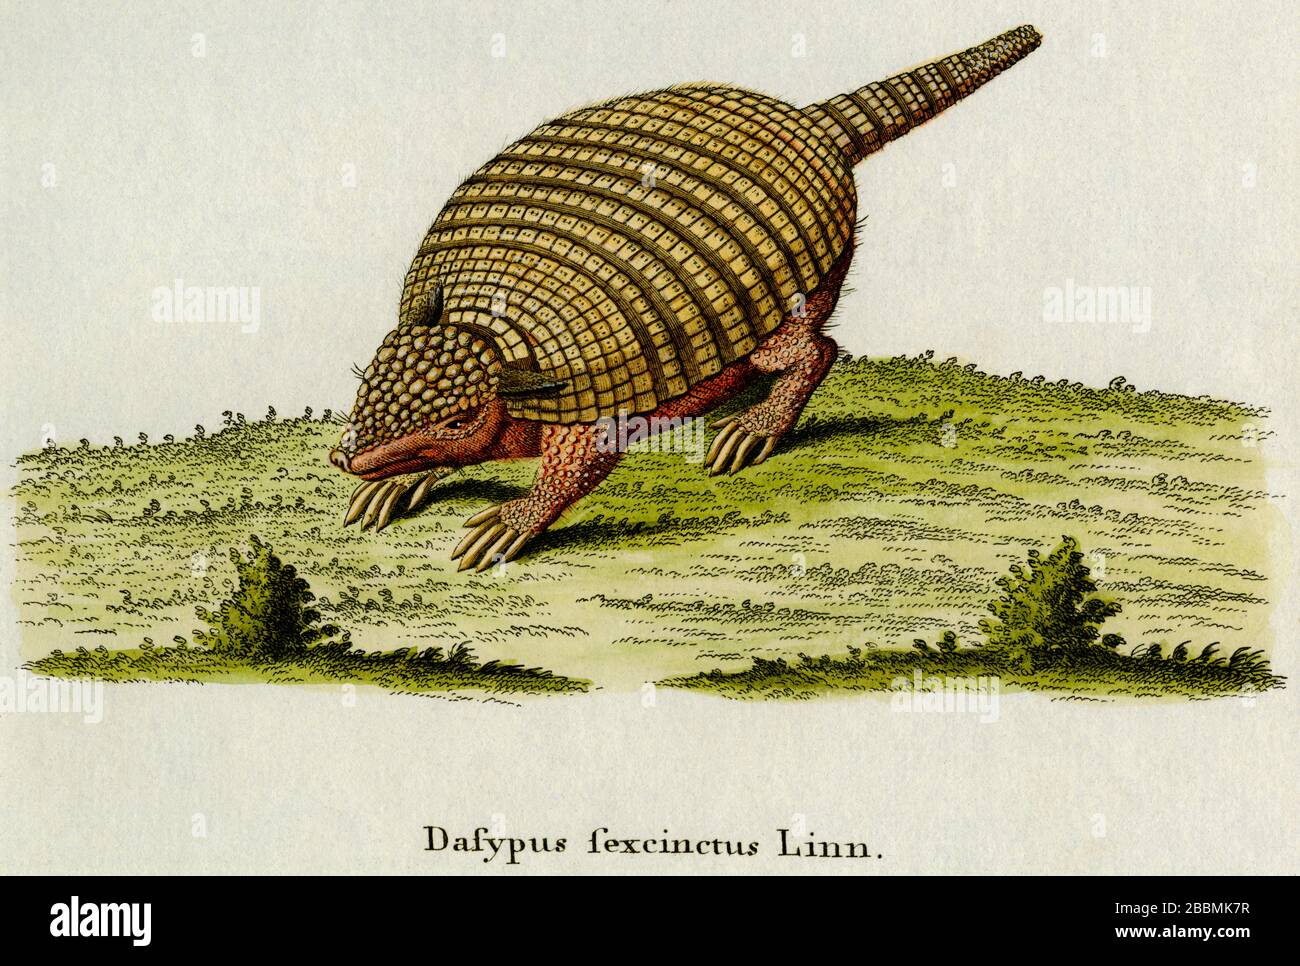 Six-banded or yellow armadillo.  Engraving created in 1700s for renowned work on mammals by German naturalist, Johann Christian Daniel von Schreber, the multi-volume 'Die Saugthiere in Abbildungen nach der Natur mit Beschreibungen' ('The Mammals in Accordance with Illustrations of Nature with Descriptions'), published from 1775 to 1792. Collectively, the mammals featured by Schreber in this work have come to be known as 'Schreber's Fantastic Beasts'.  The engraving was later coloured by hand. Stock Photo